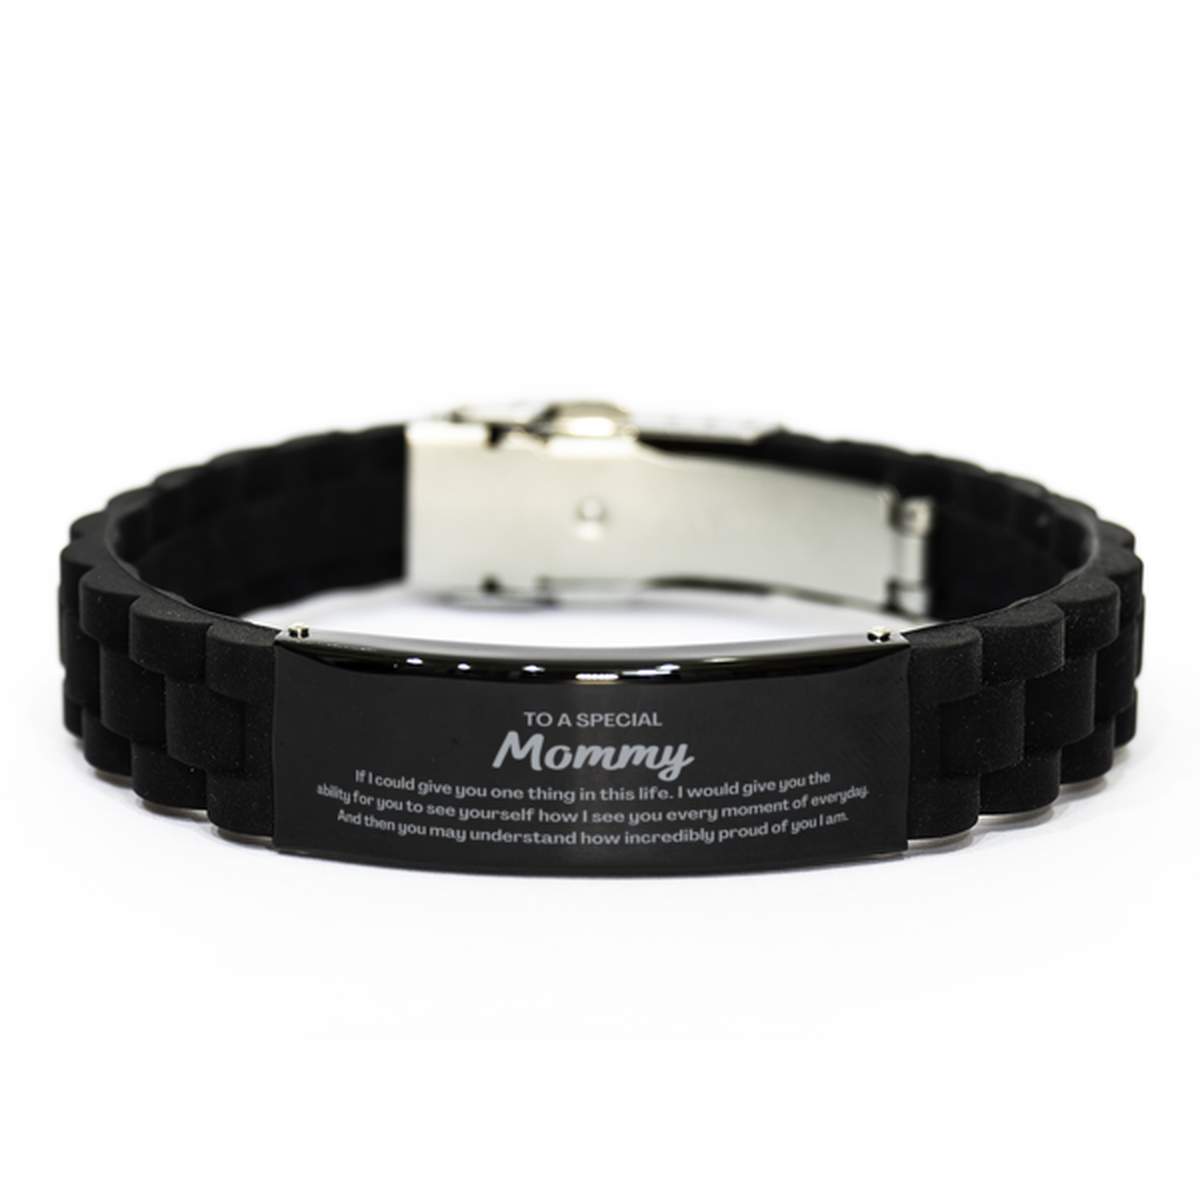 To My Mommy Black Glidelock Clasp Bracelet, Gifts For Mommy Engraved, Inspirational Gifts for Christmas Birthday, Epic Gifts for Mommy To A Special Mommy how incredibly proud of you I am